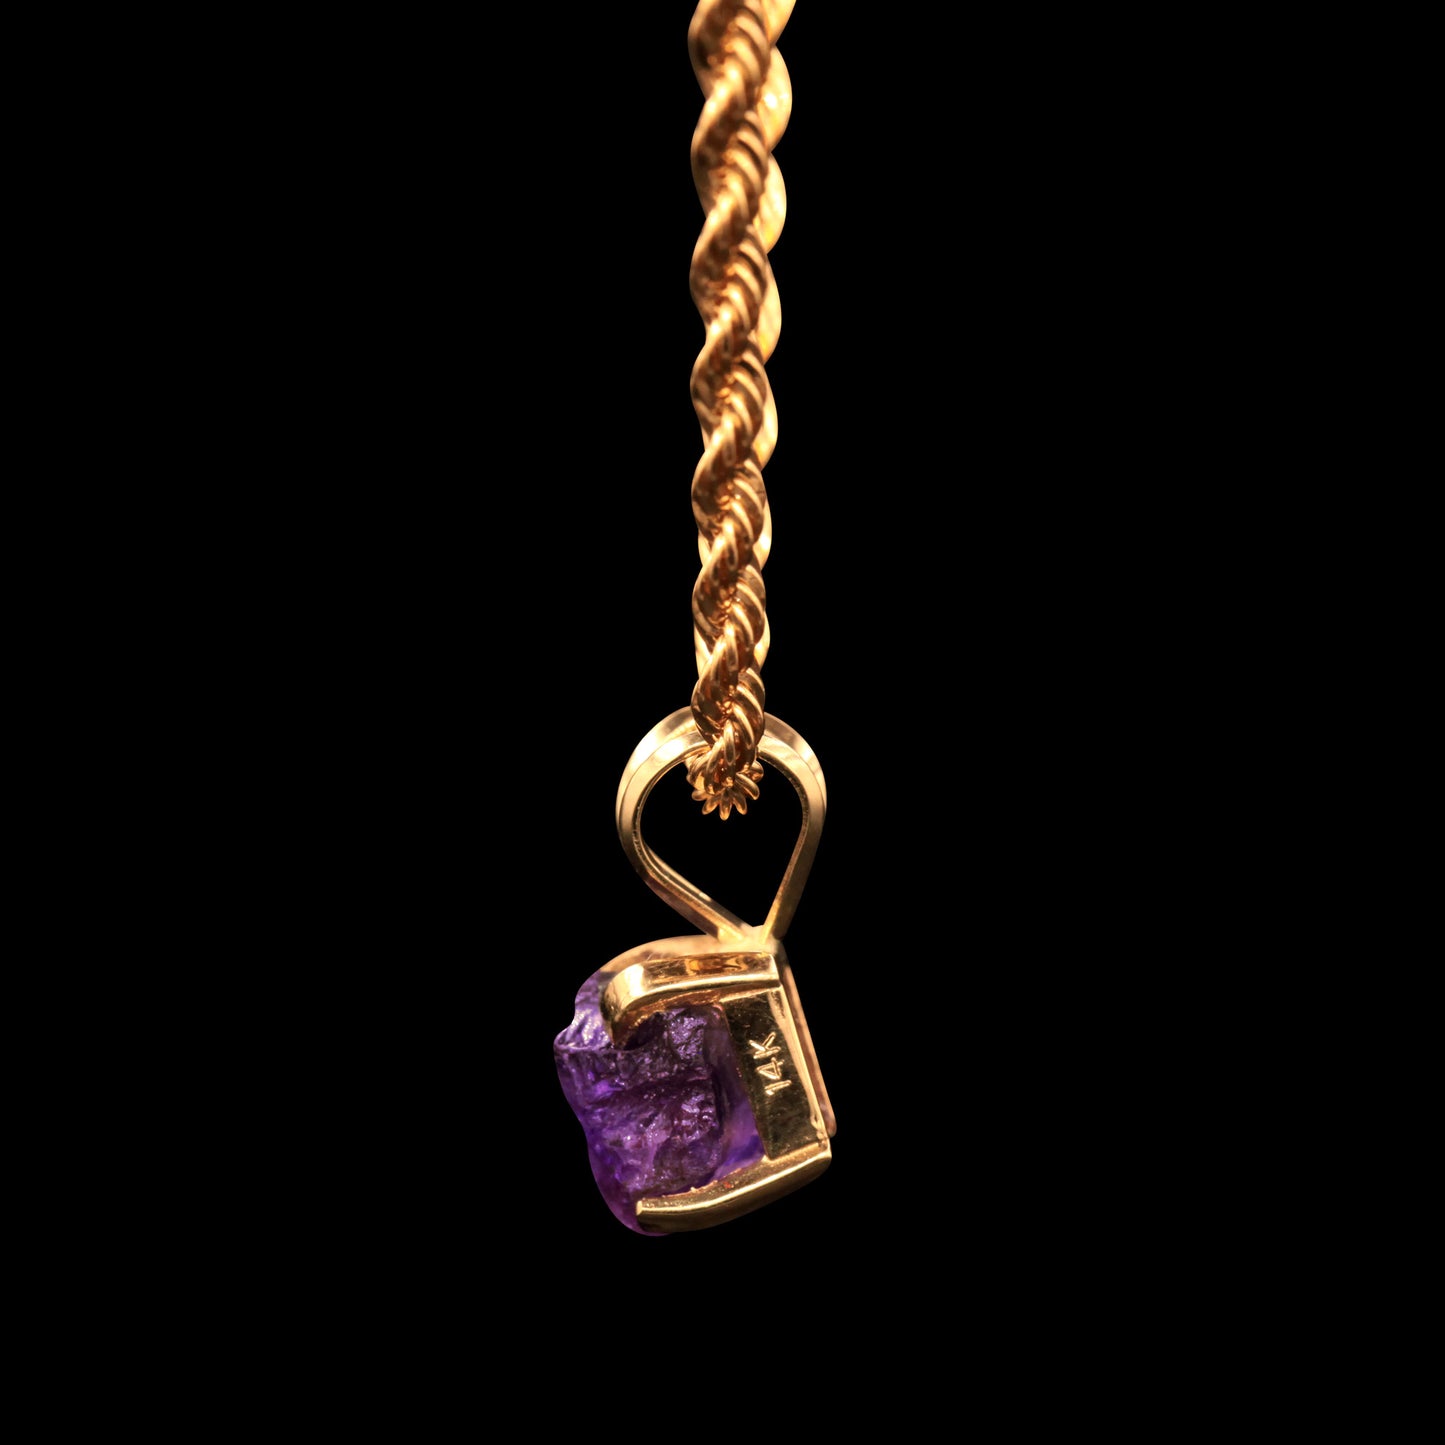 2.7 CARAT NATURAL UNTREATED BRAZILIAN AMETHYST GEM SOLITAIRE ON 14K ROPE